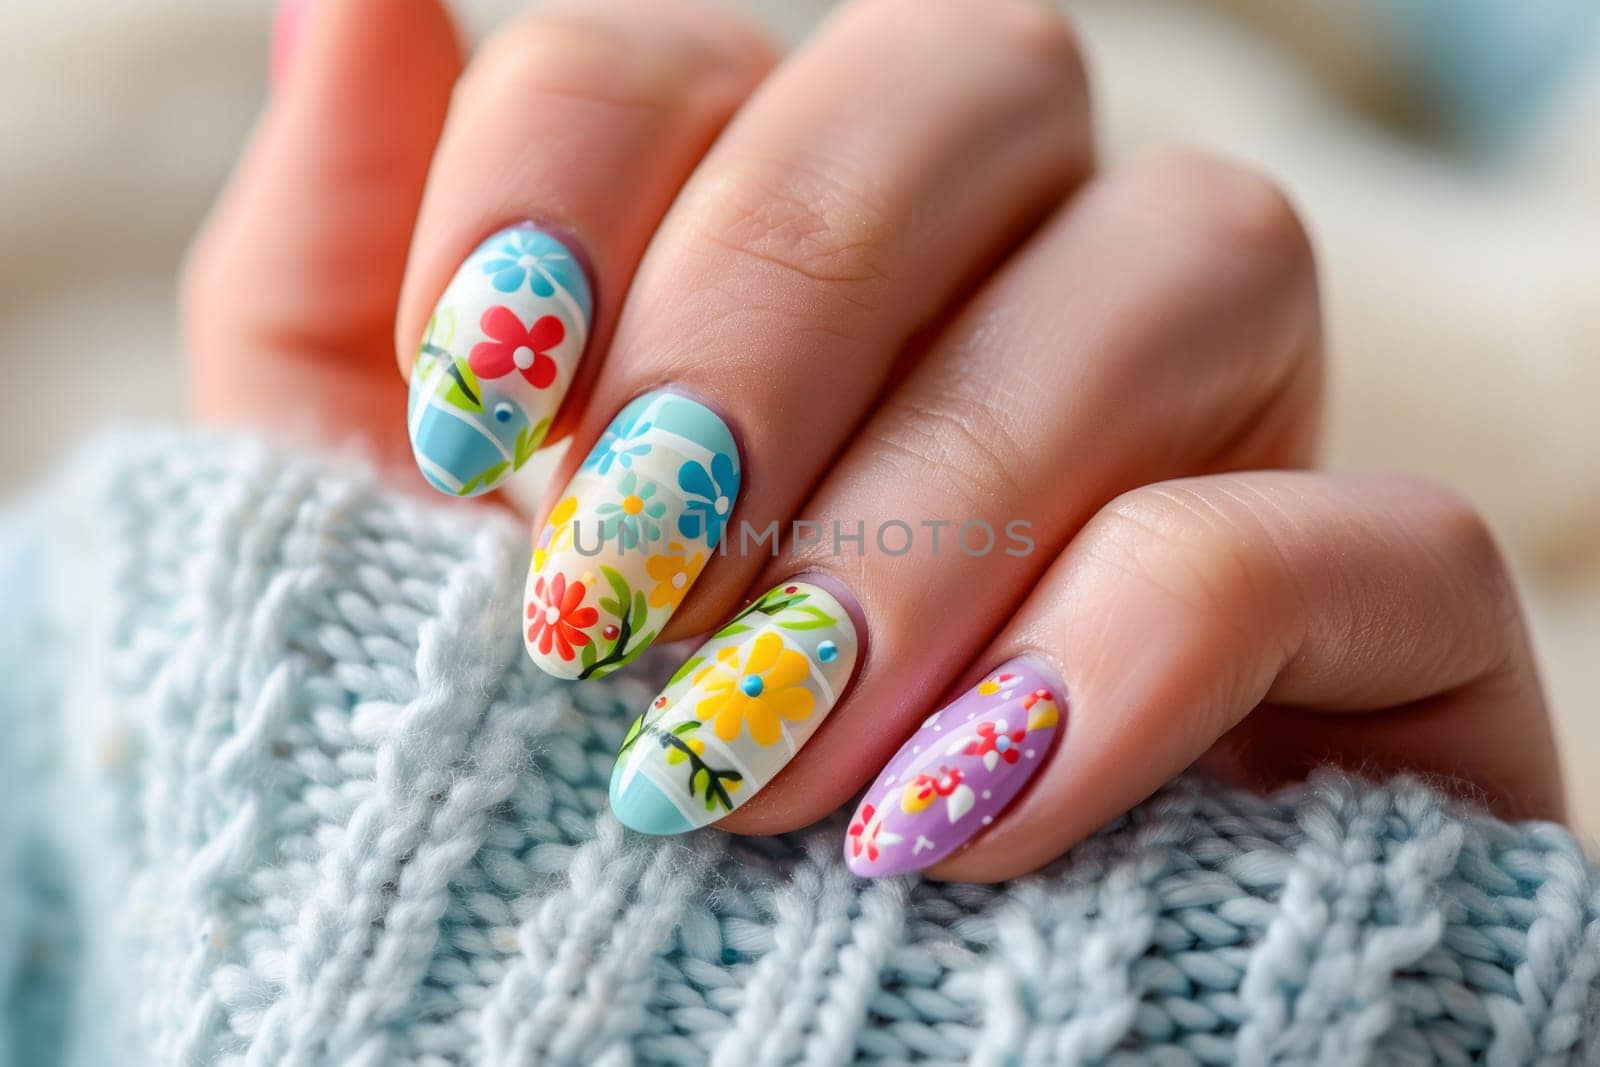 Woman's hand with Easter nail design. by OlgaGubskaya